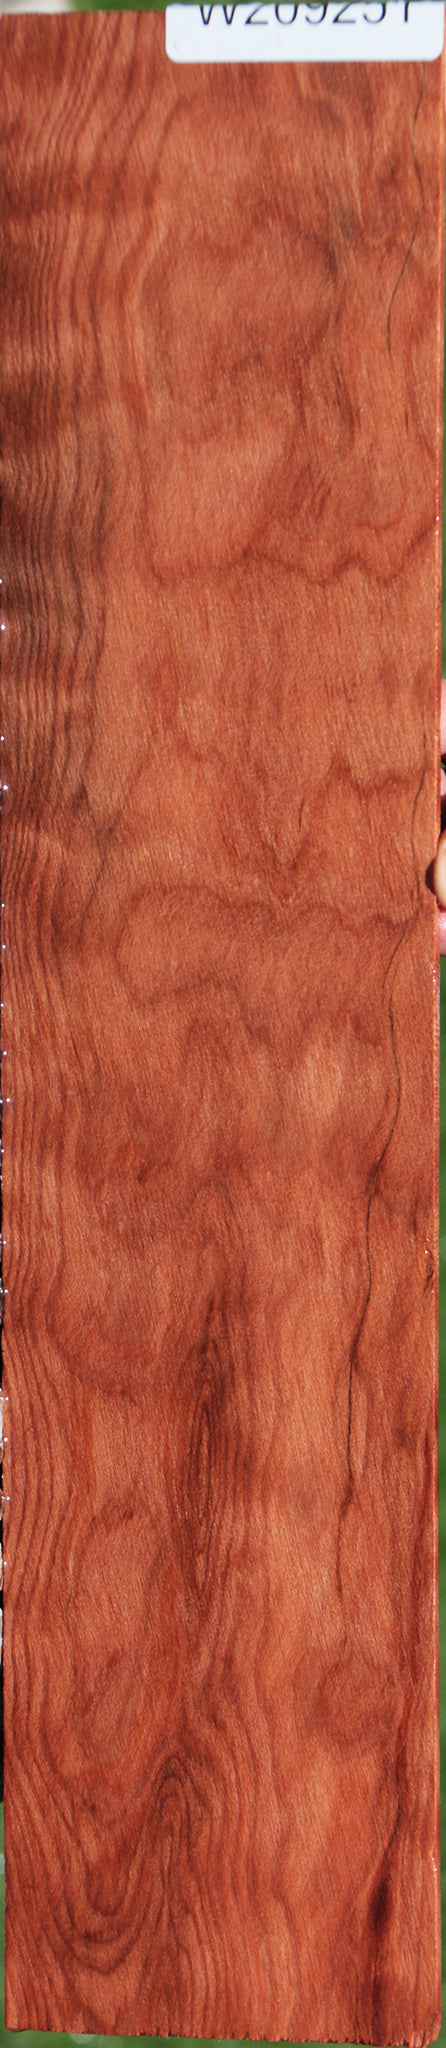 Extra Fancy Curly Redwood Micro Lumber